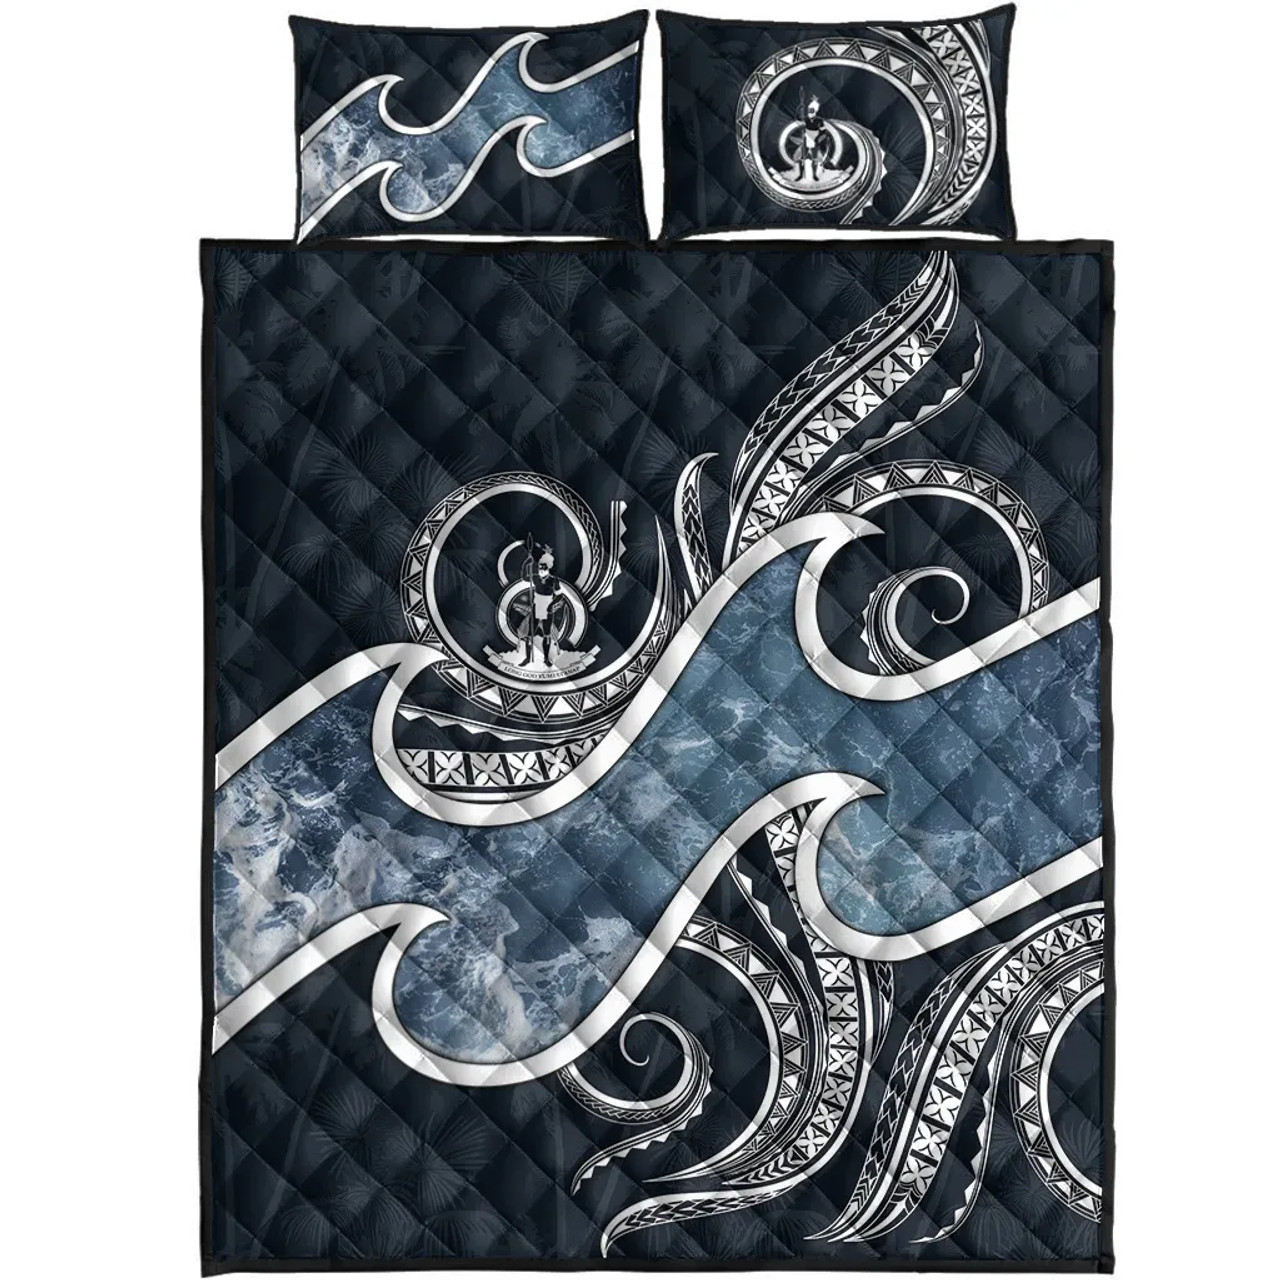 Tuvalu Polynesian Quilt Bed Set - Ocean Style 2